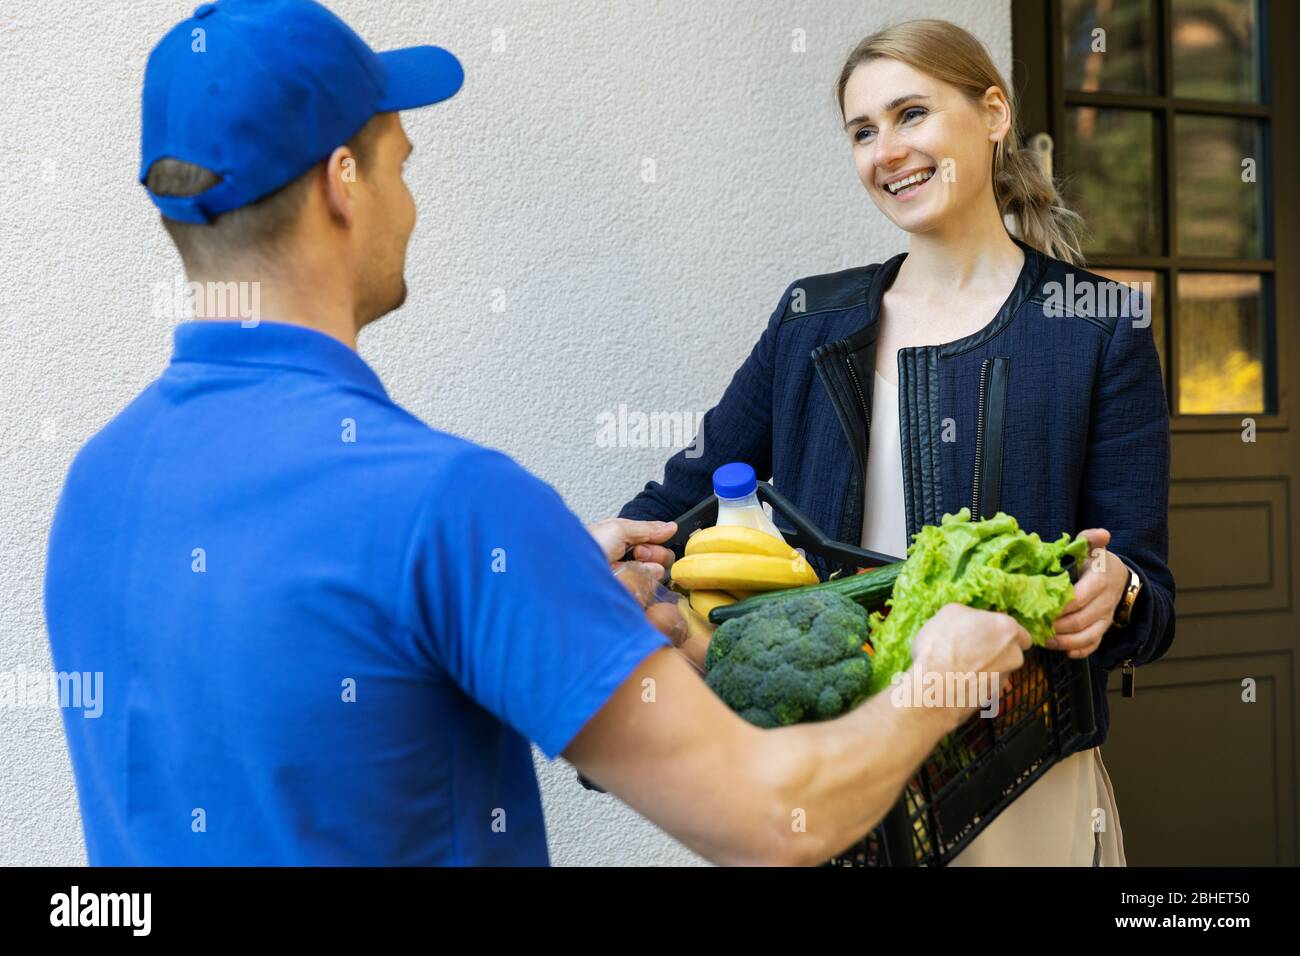 woman receive online grocery order box from delivery man at home Stock Photo